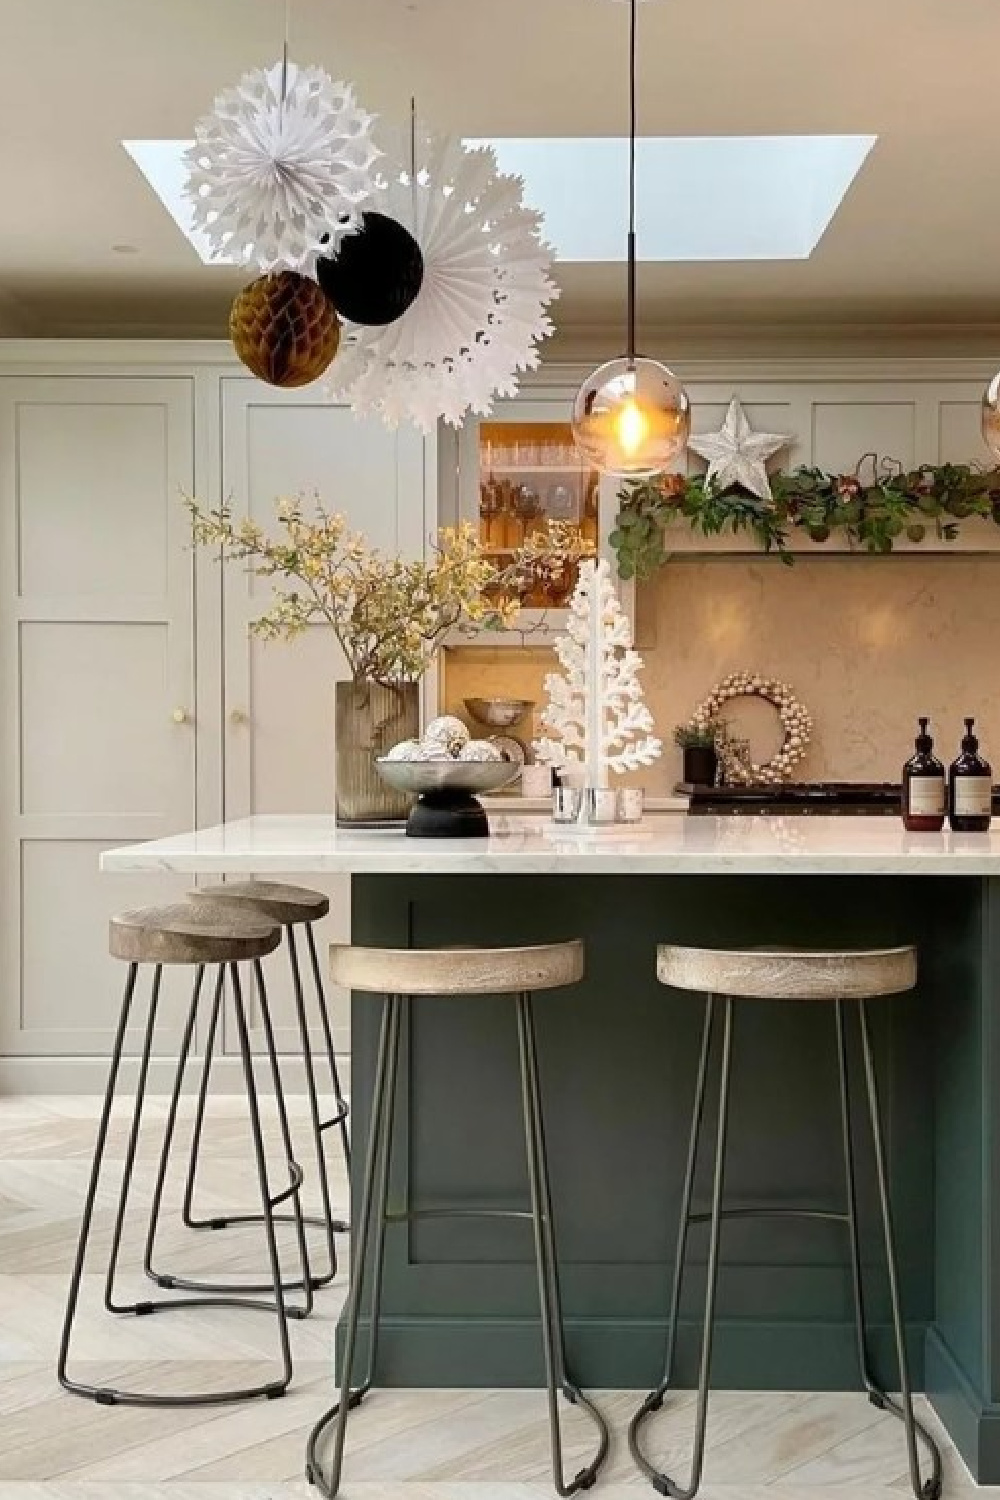 Pavilion Gray (Farrow & Ball) paint color on kitchen cabinets in a beautiful holiday decorated kitchen by @my_midcenturymakeover. #paviliongray